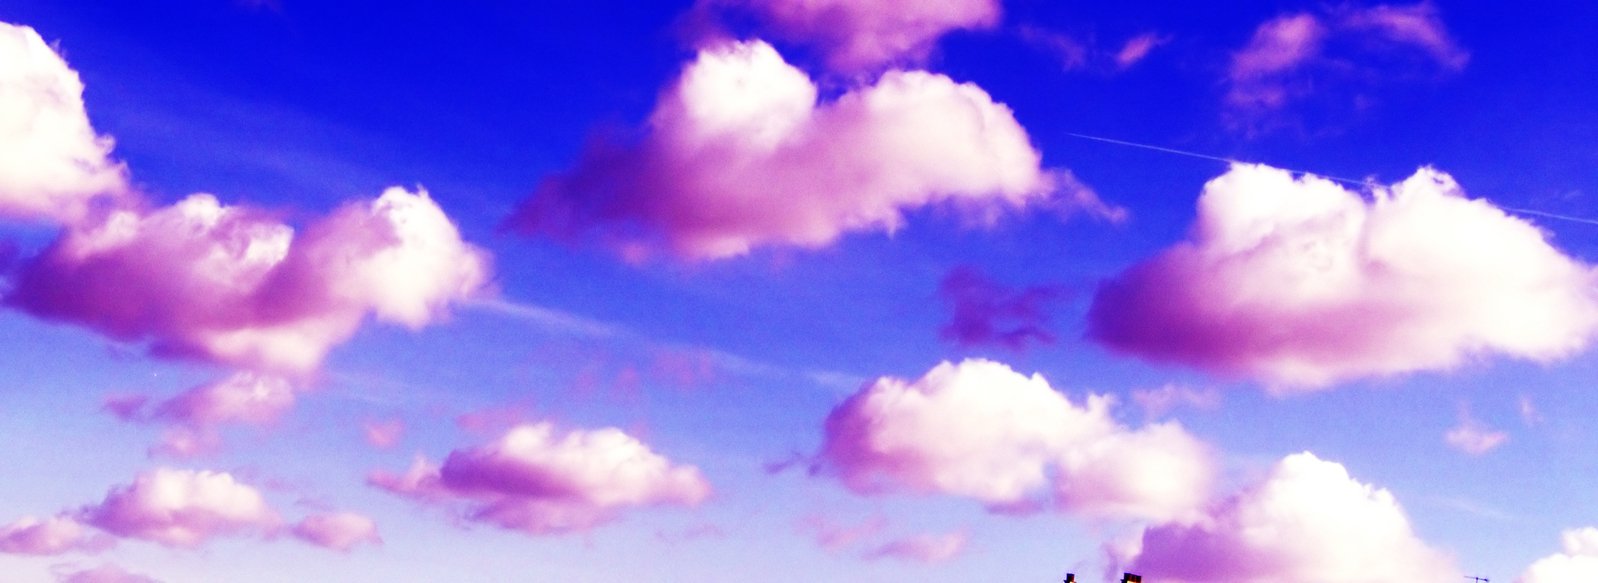 white fluffy clouds form a pinkish background as the plane flies in the sky